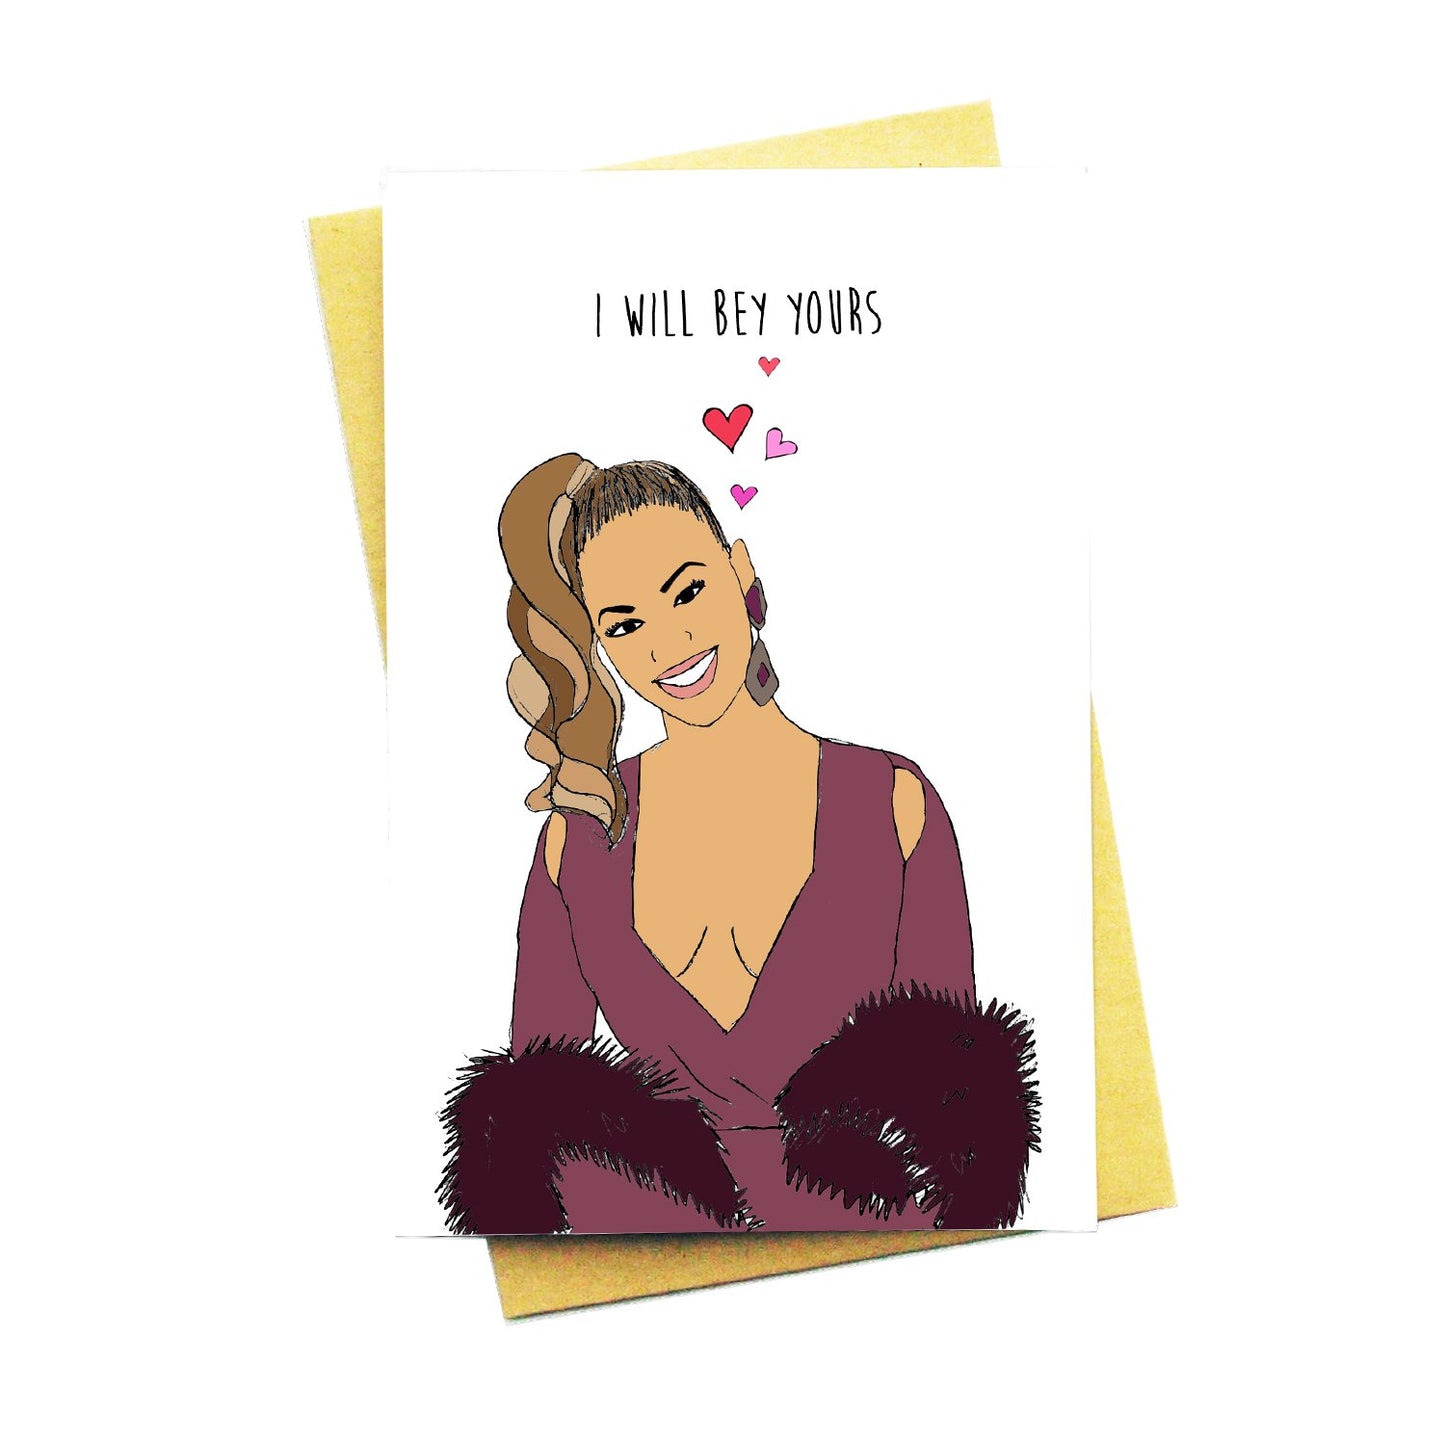 Nocturnal Bey Yours Card